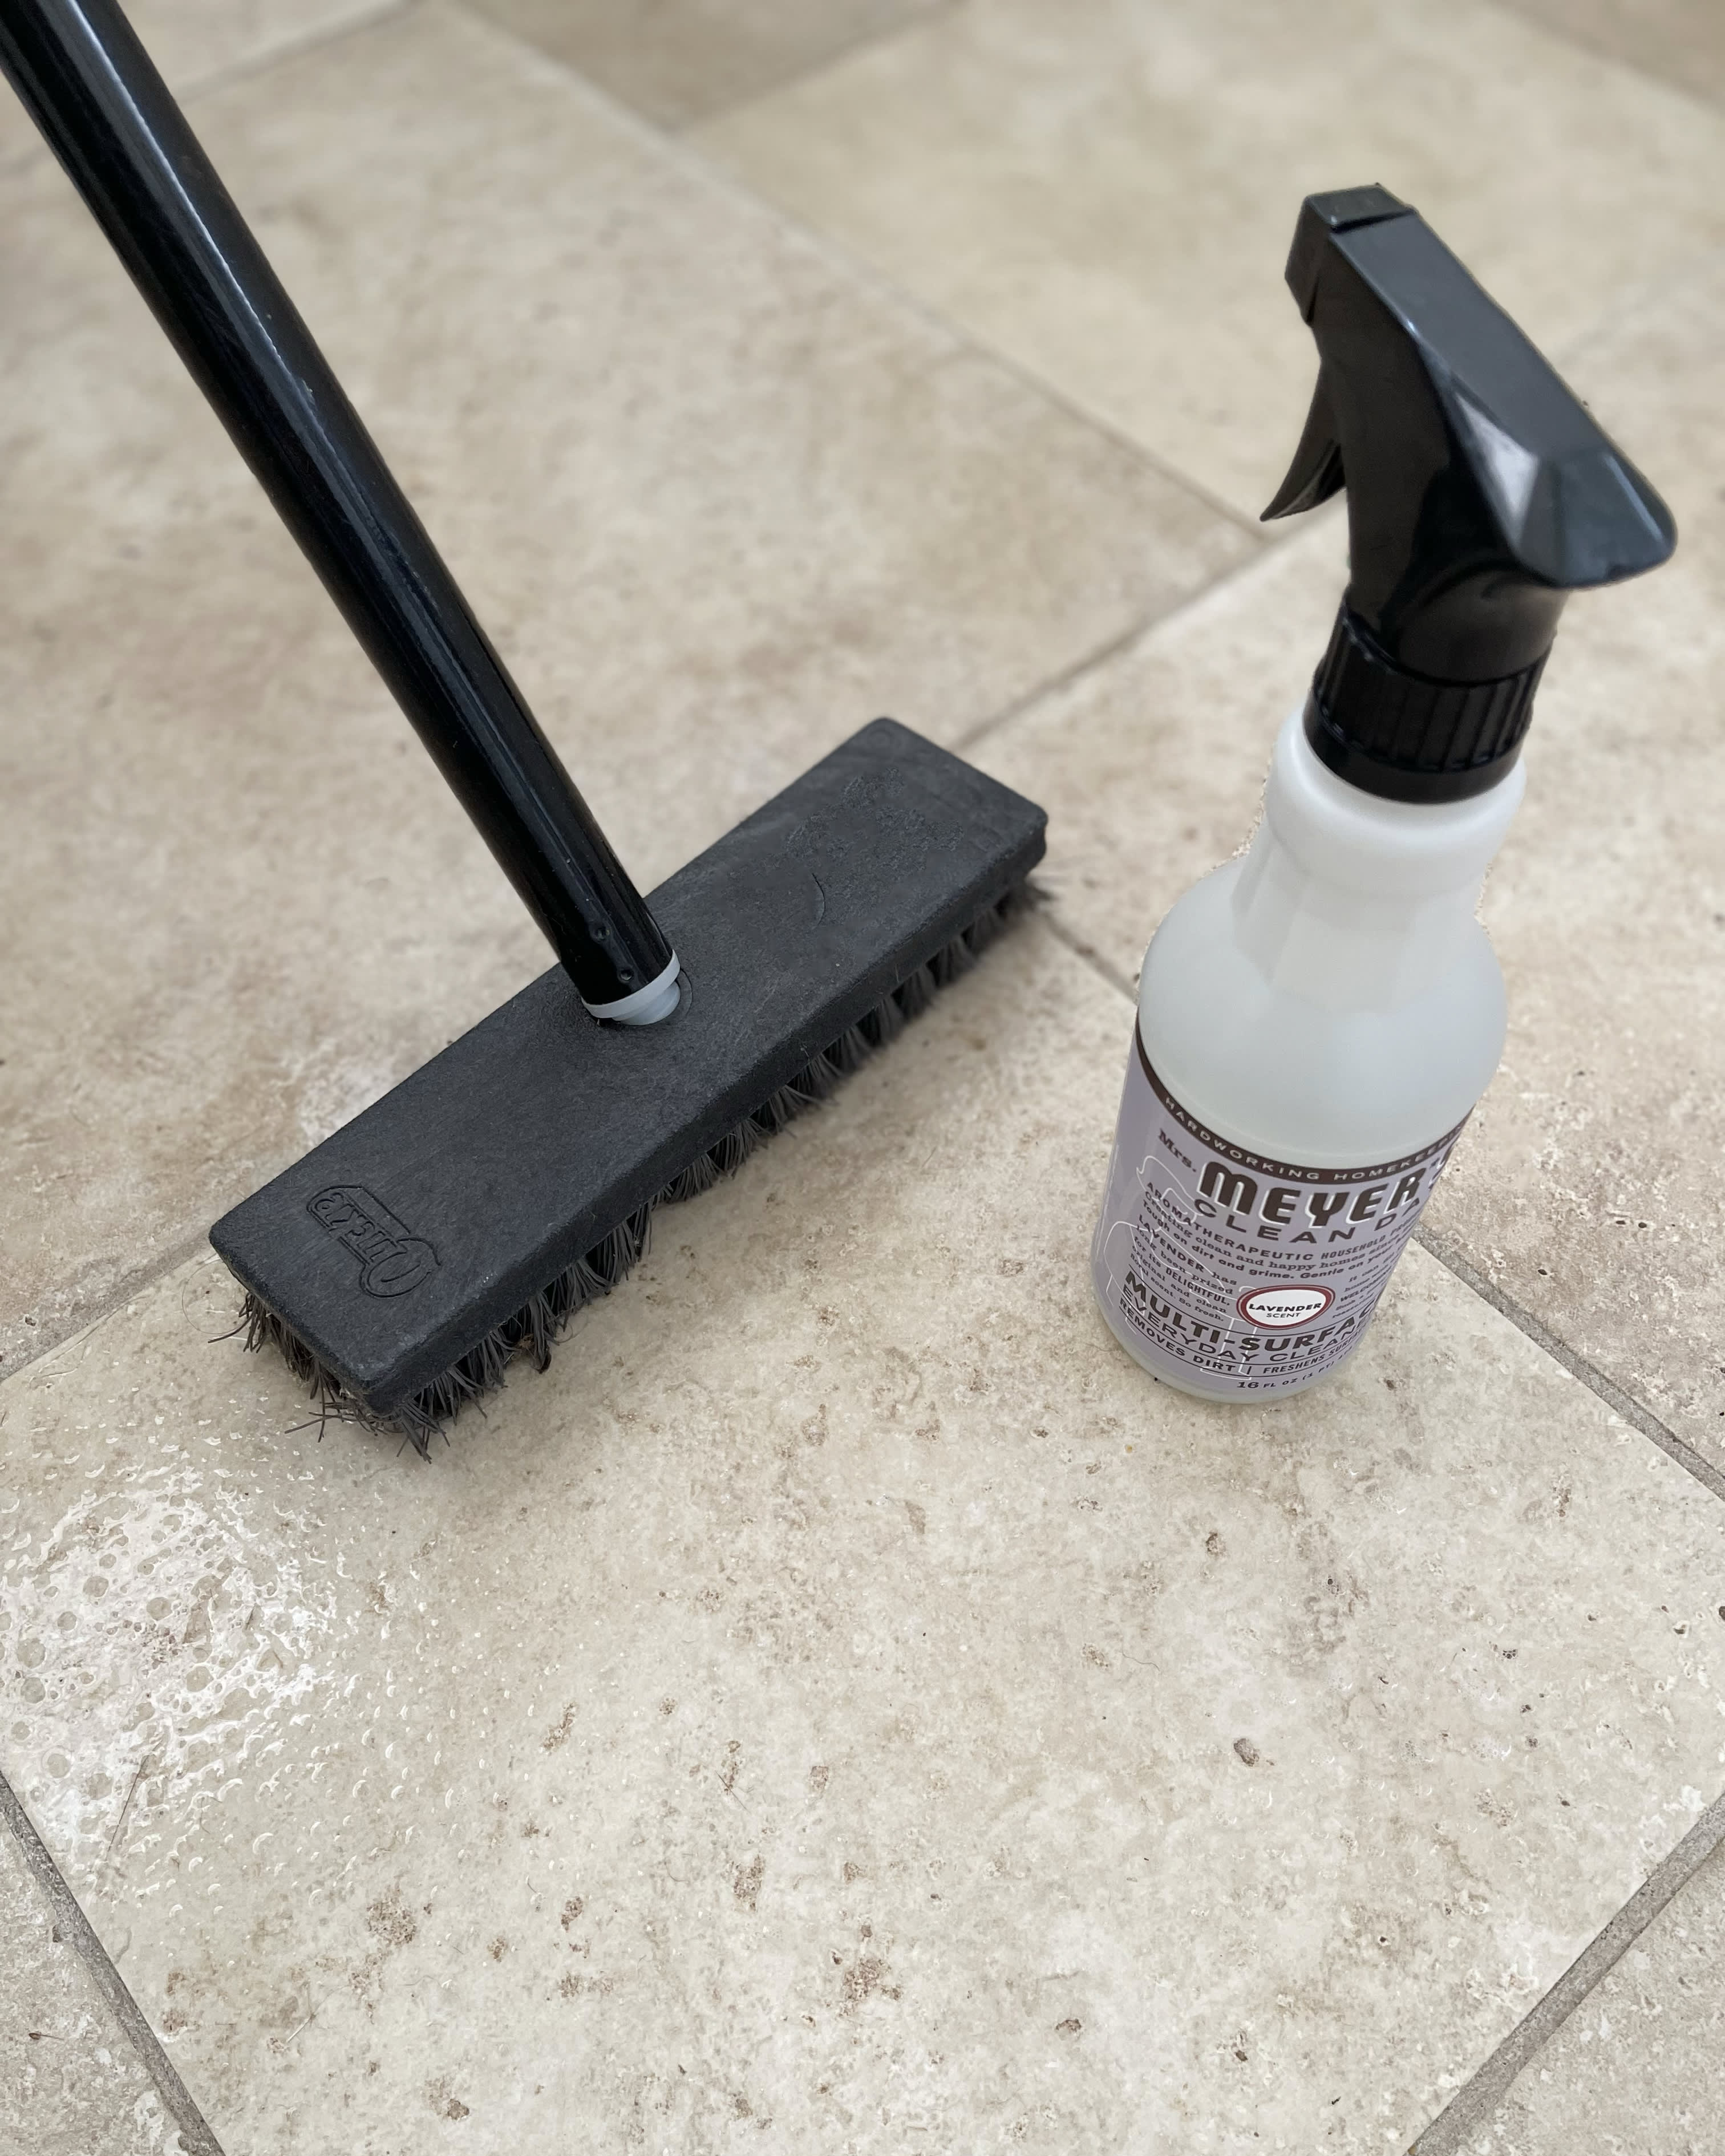 This Floor Scrubber Can Clean Out Years of Dirt and Grime